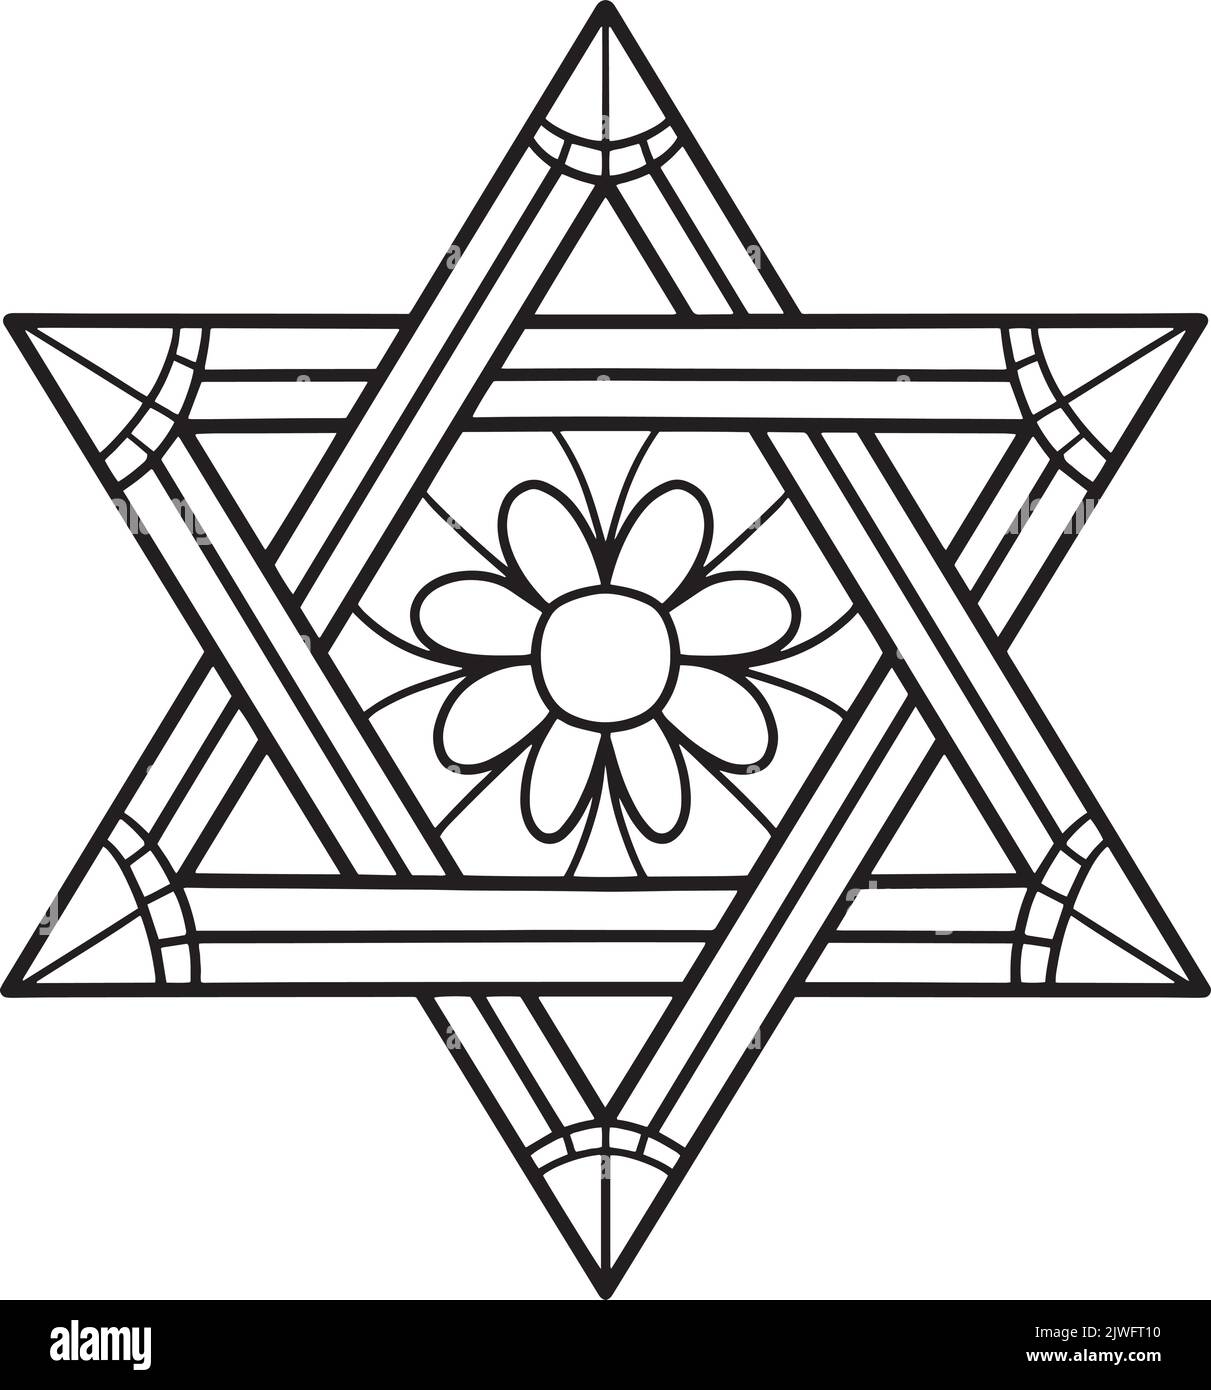 Star of david black and white stock photos images